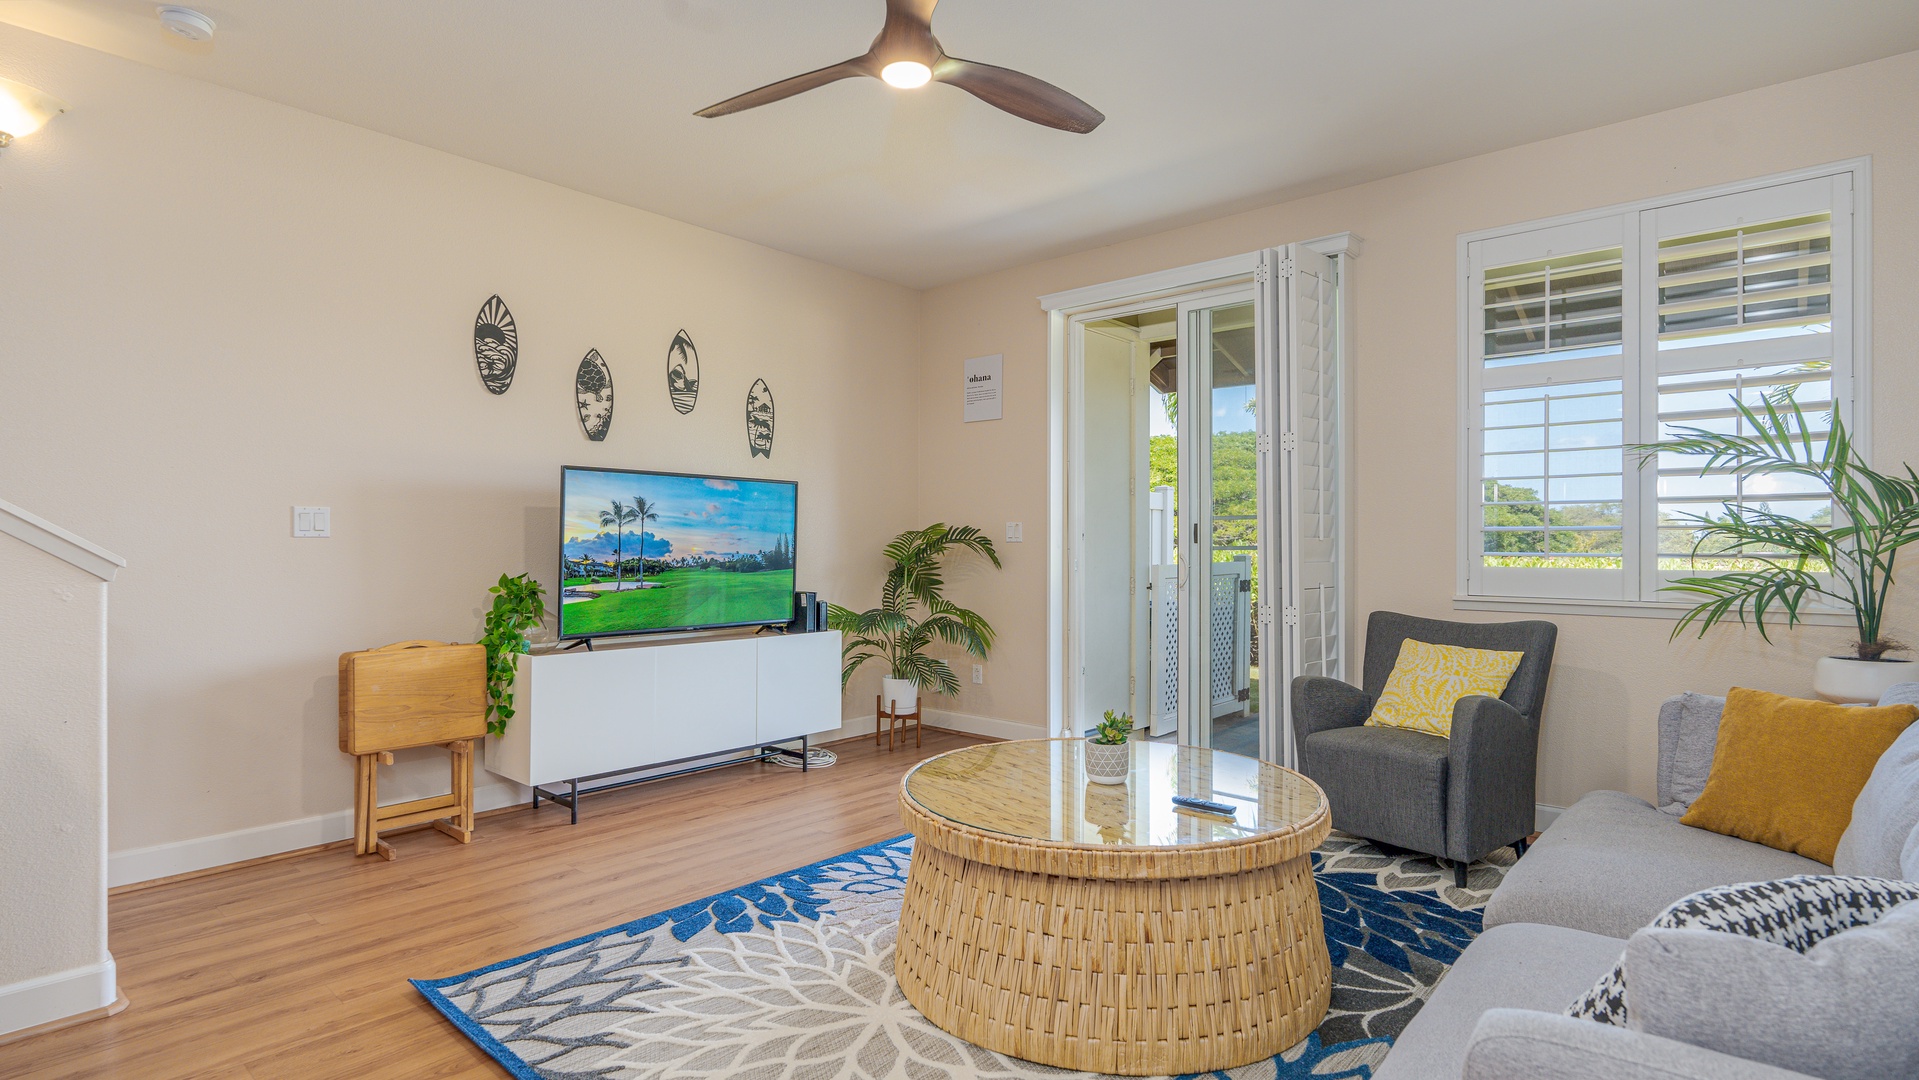 Kapolei Vacation Rentals, Hillside Villas 1496-2 - Relax with a book or movie night on the television.